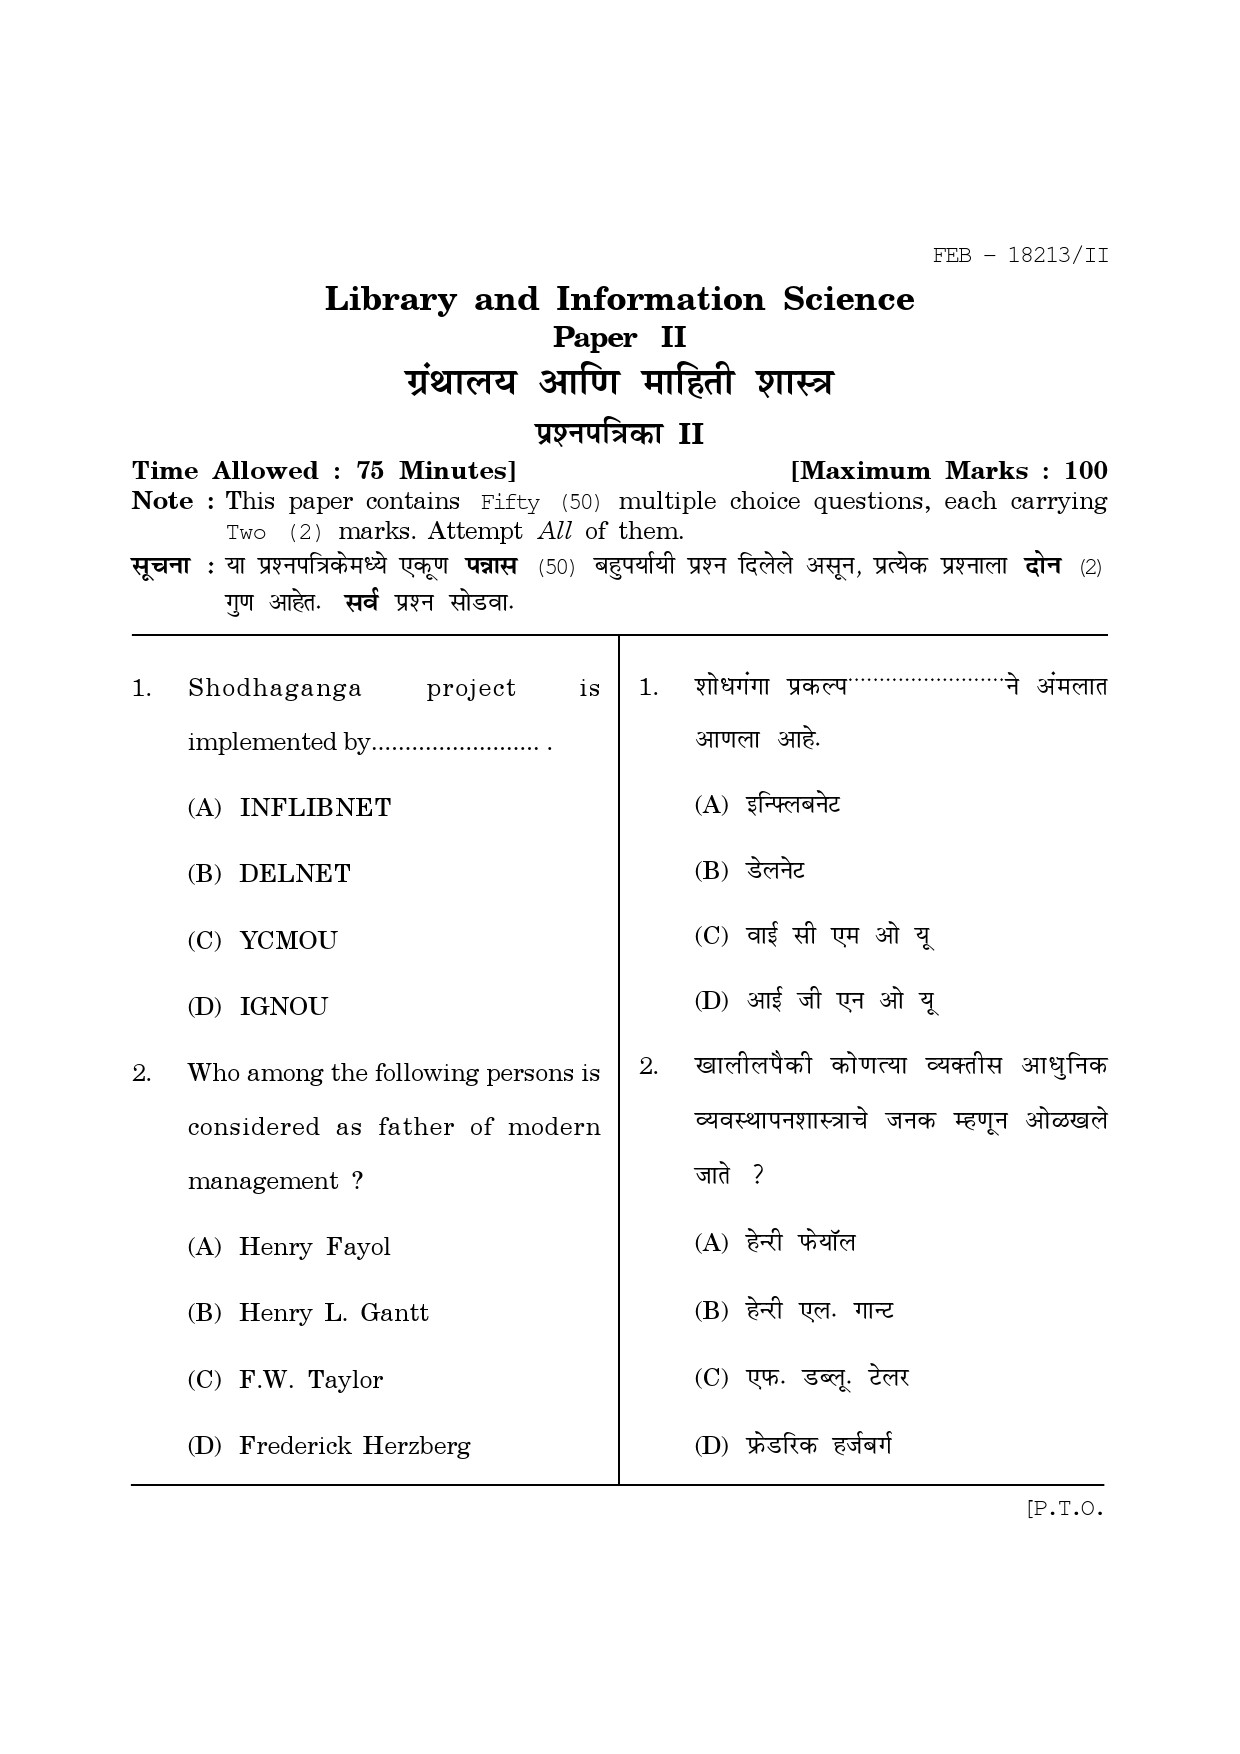 Maharashtra SET Library Information Science Question Paper II February 2013 1